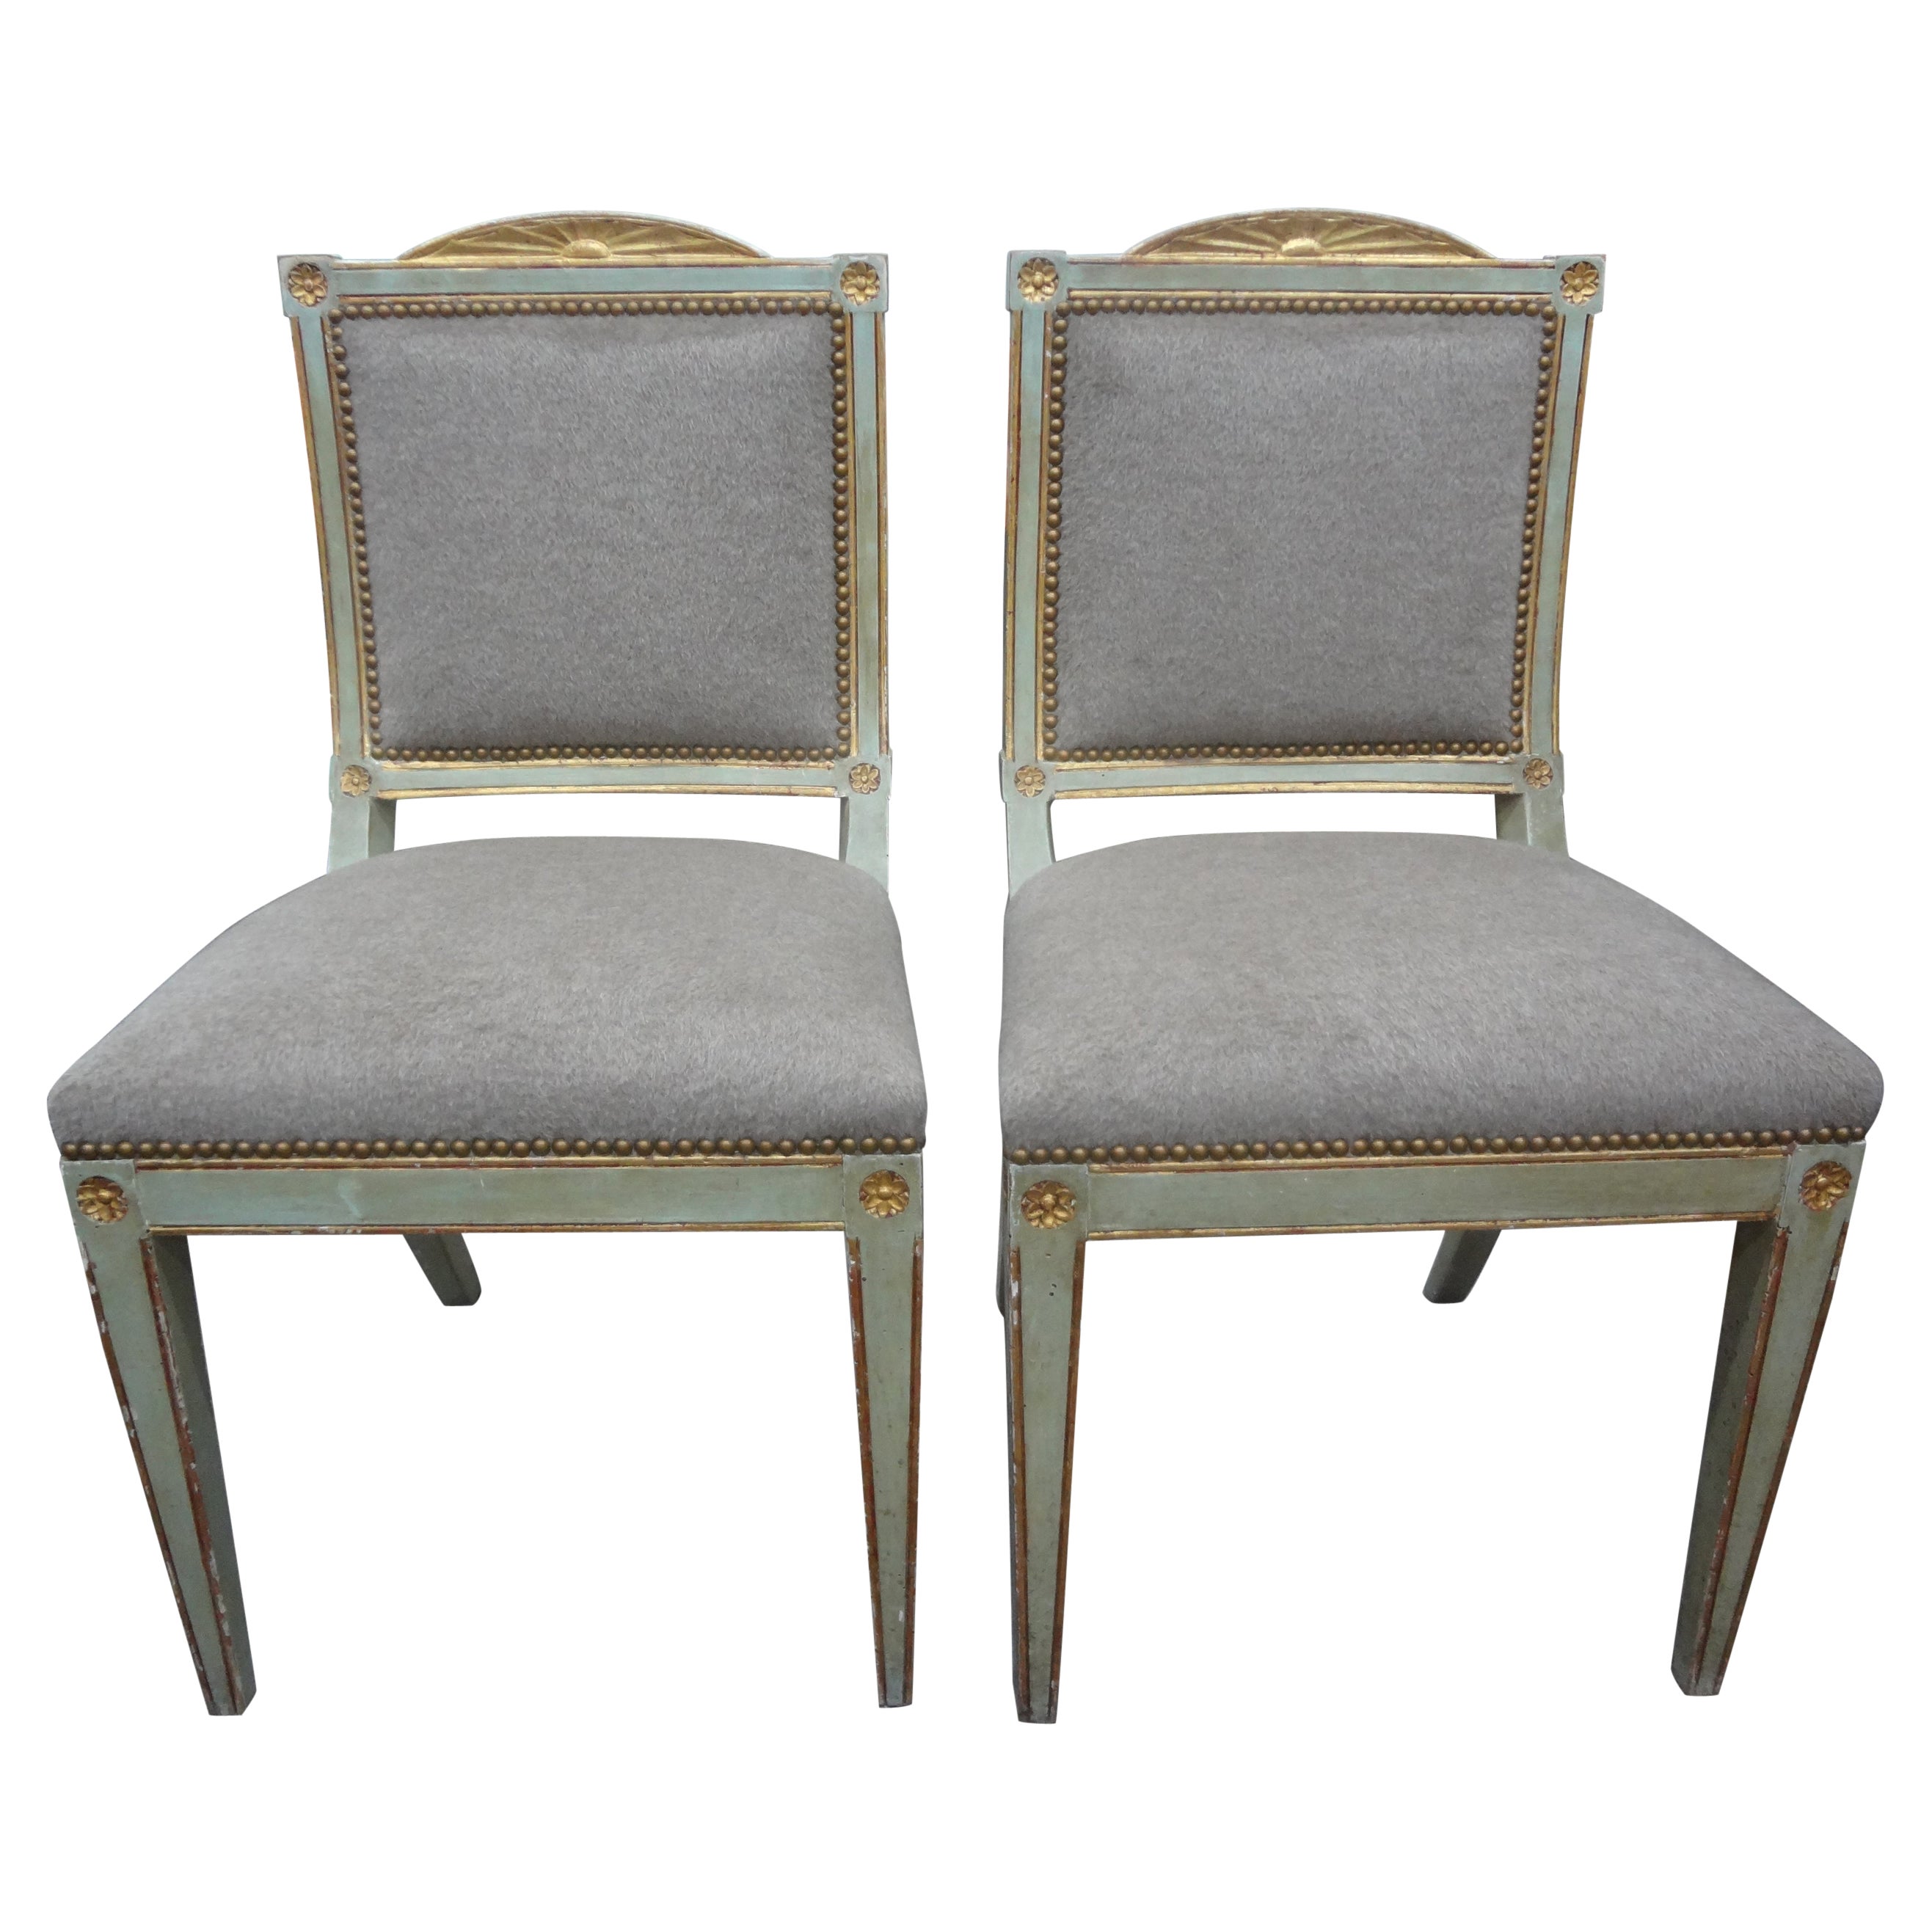 Pair of 18th Century Italian Directoire Painted and Parcel Gilt Chairs For Sale